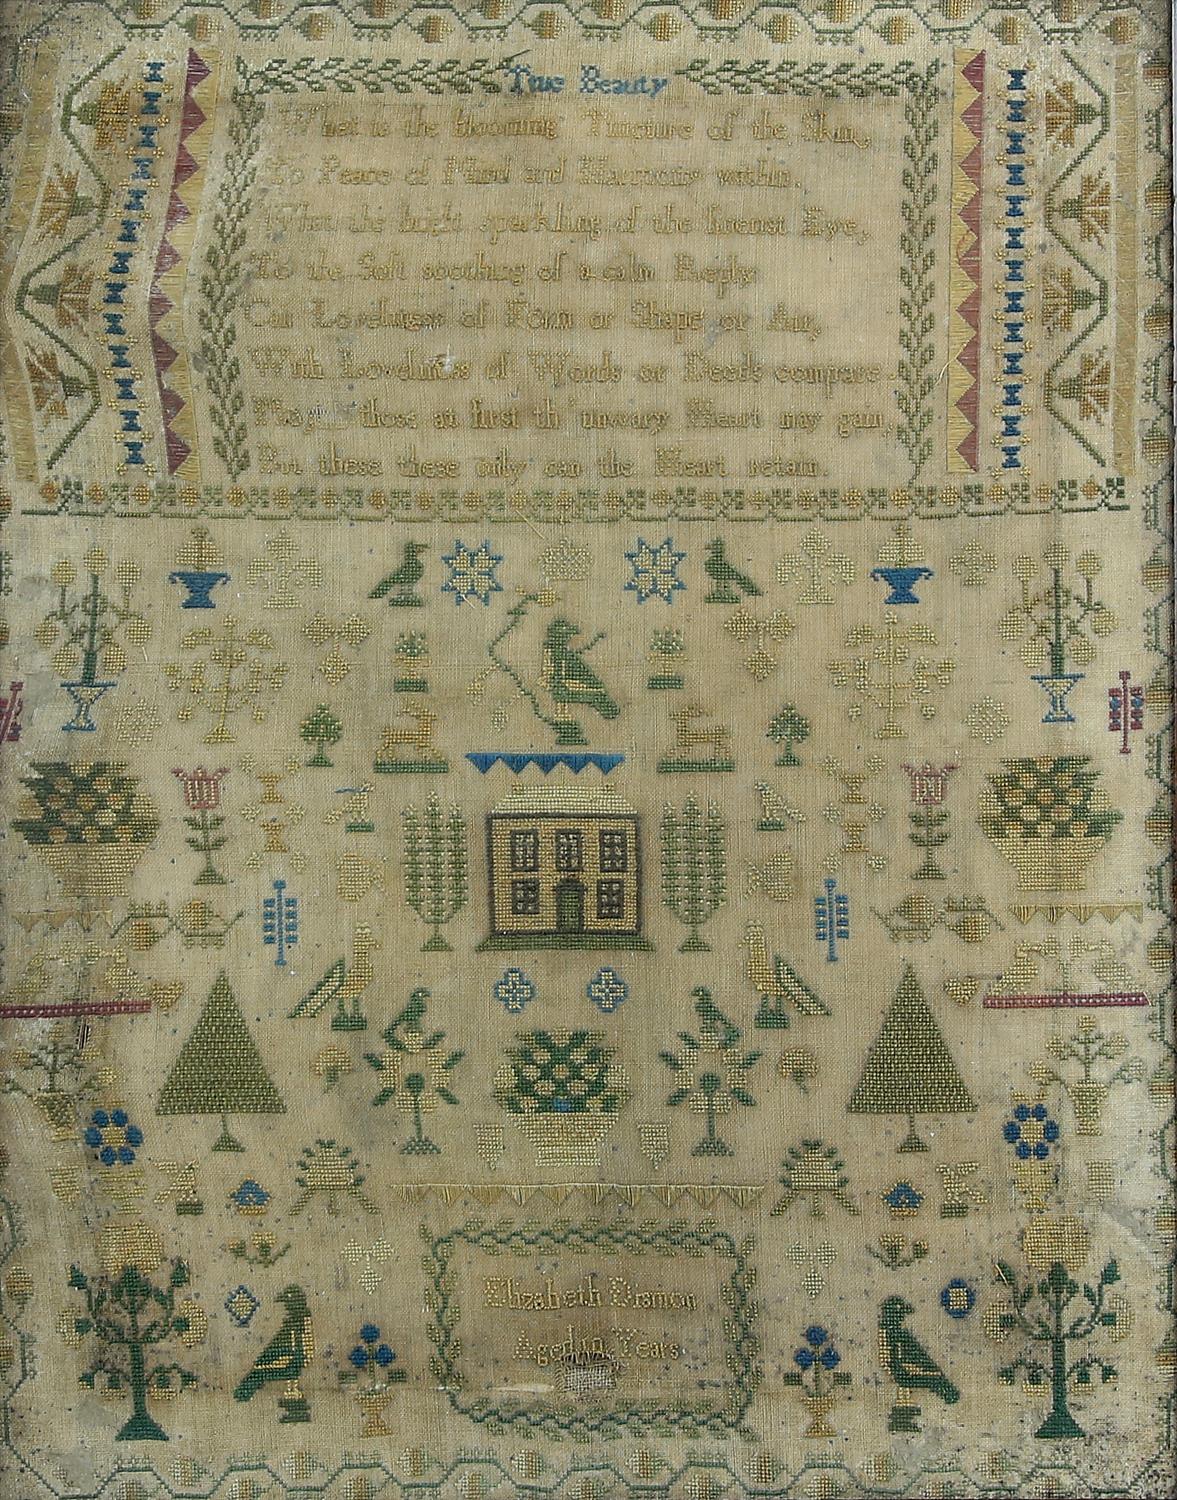 Possibly late 18th/early 19th century Sampler profusely embroidered with stylised birds trees and - Image 2 of 3